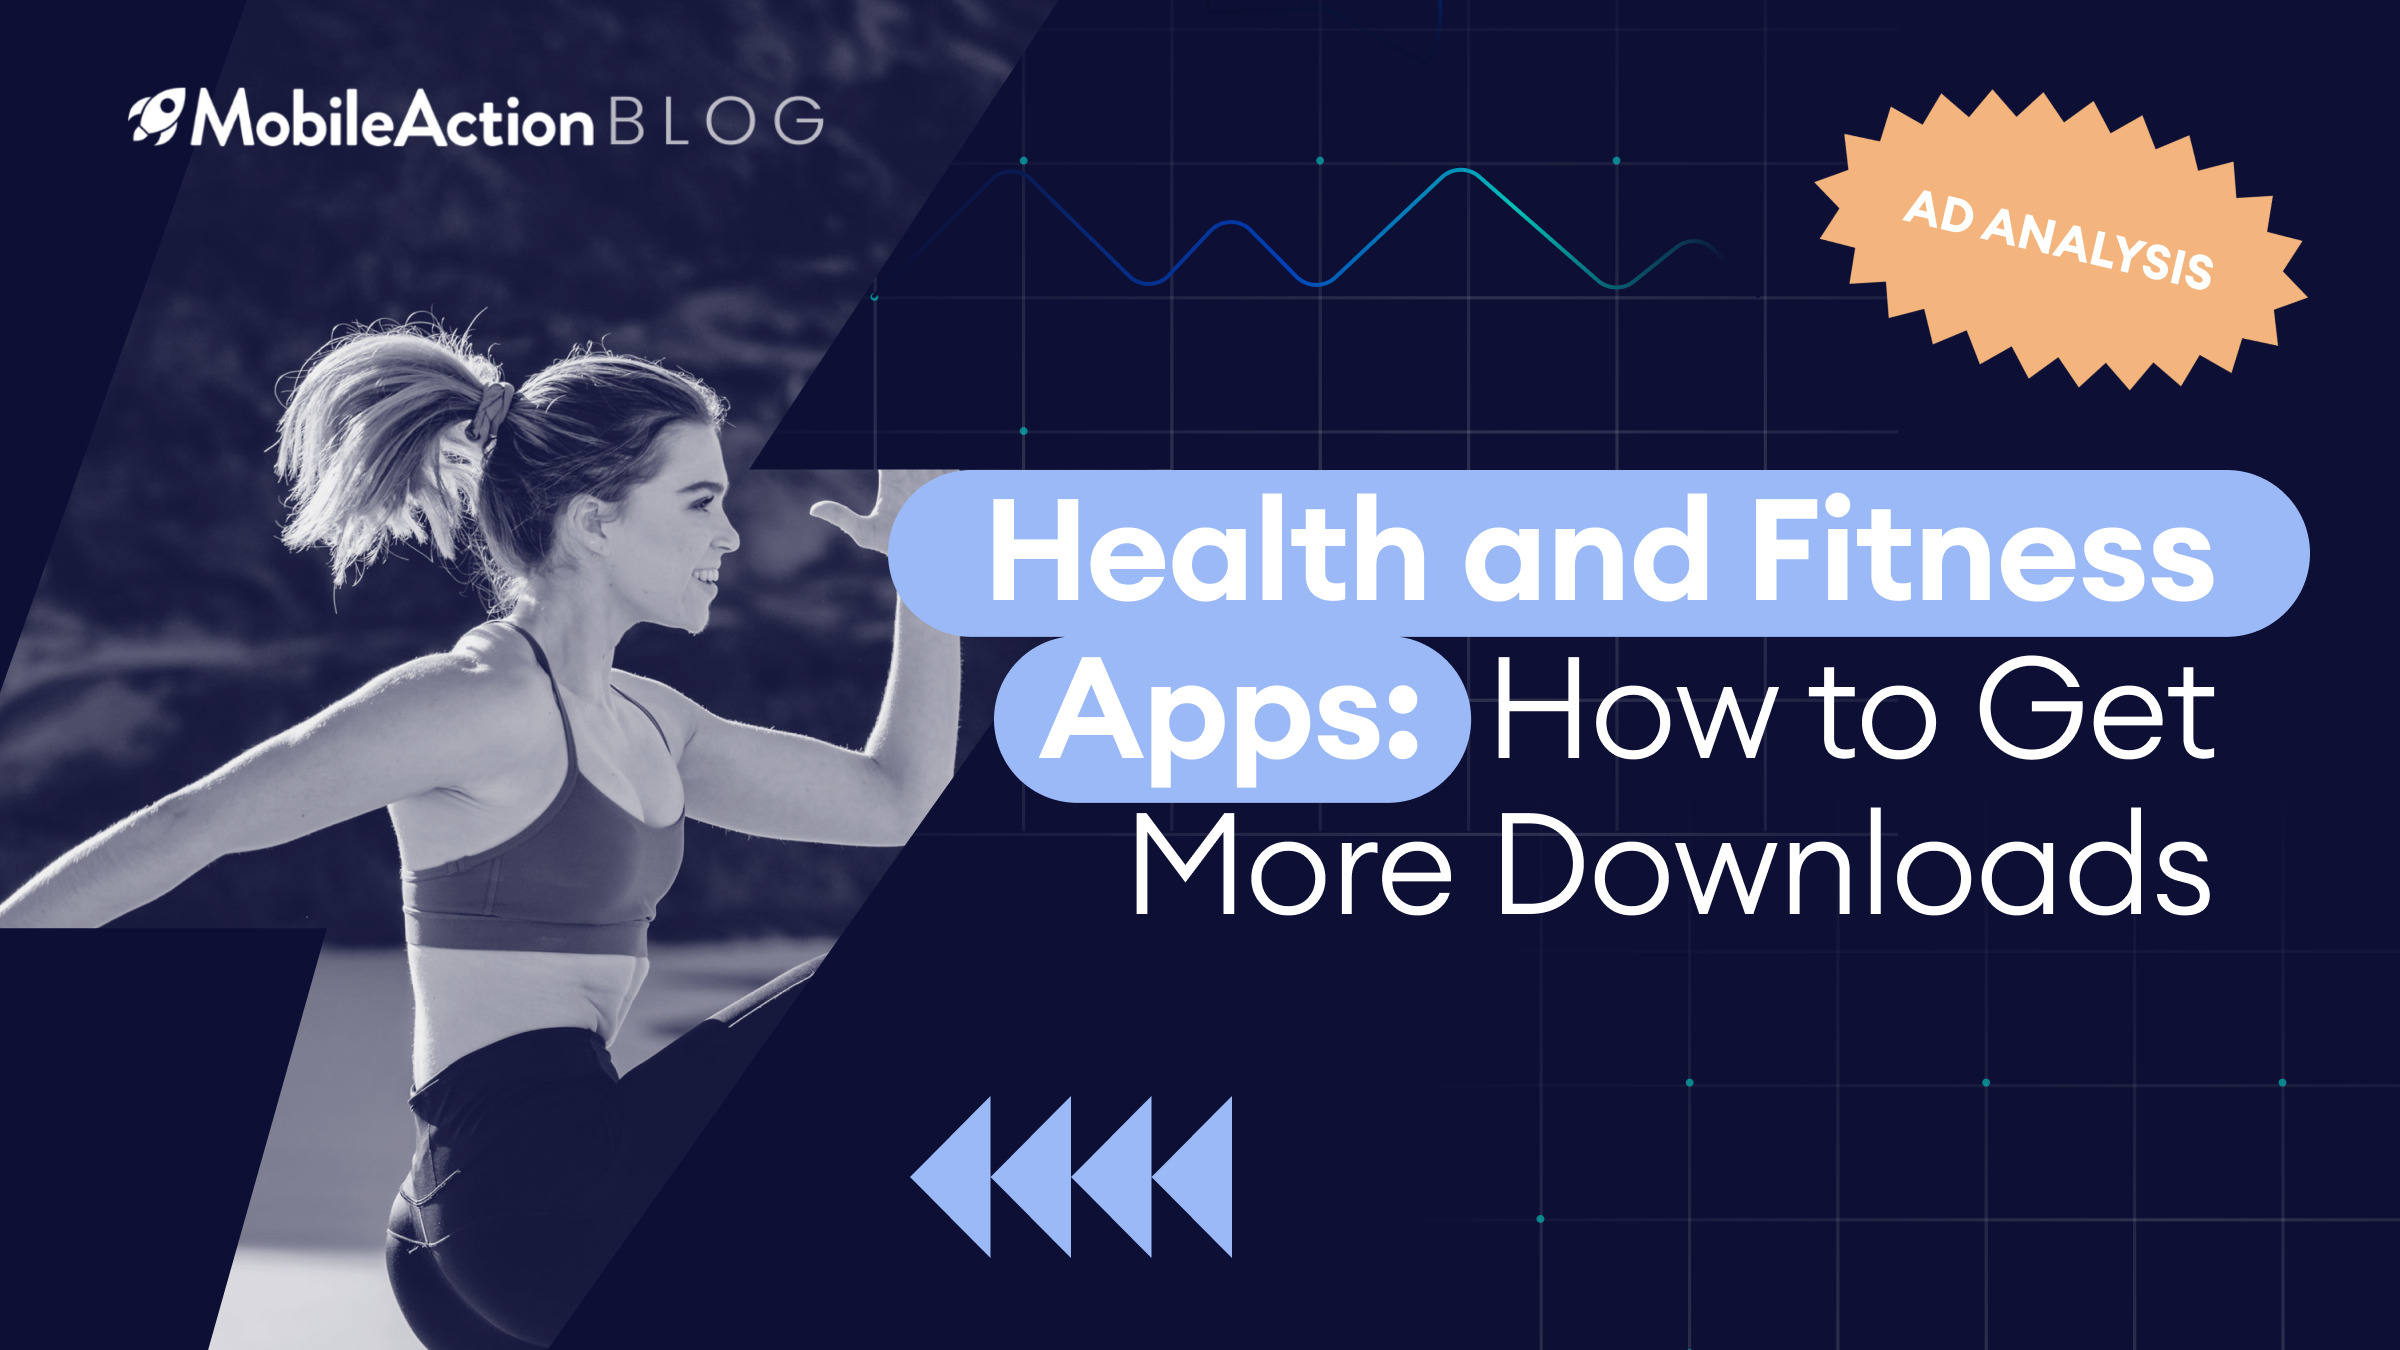 Health and Fitness Apps: How to Get More Downloads